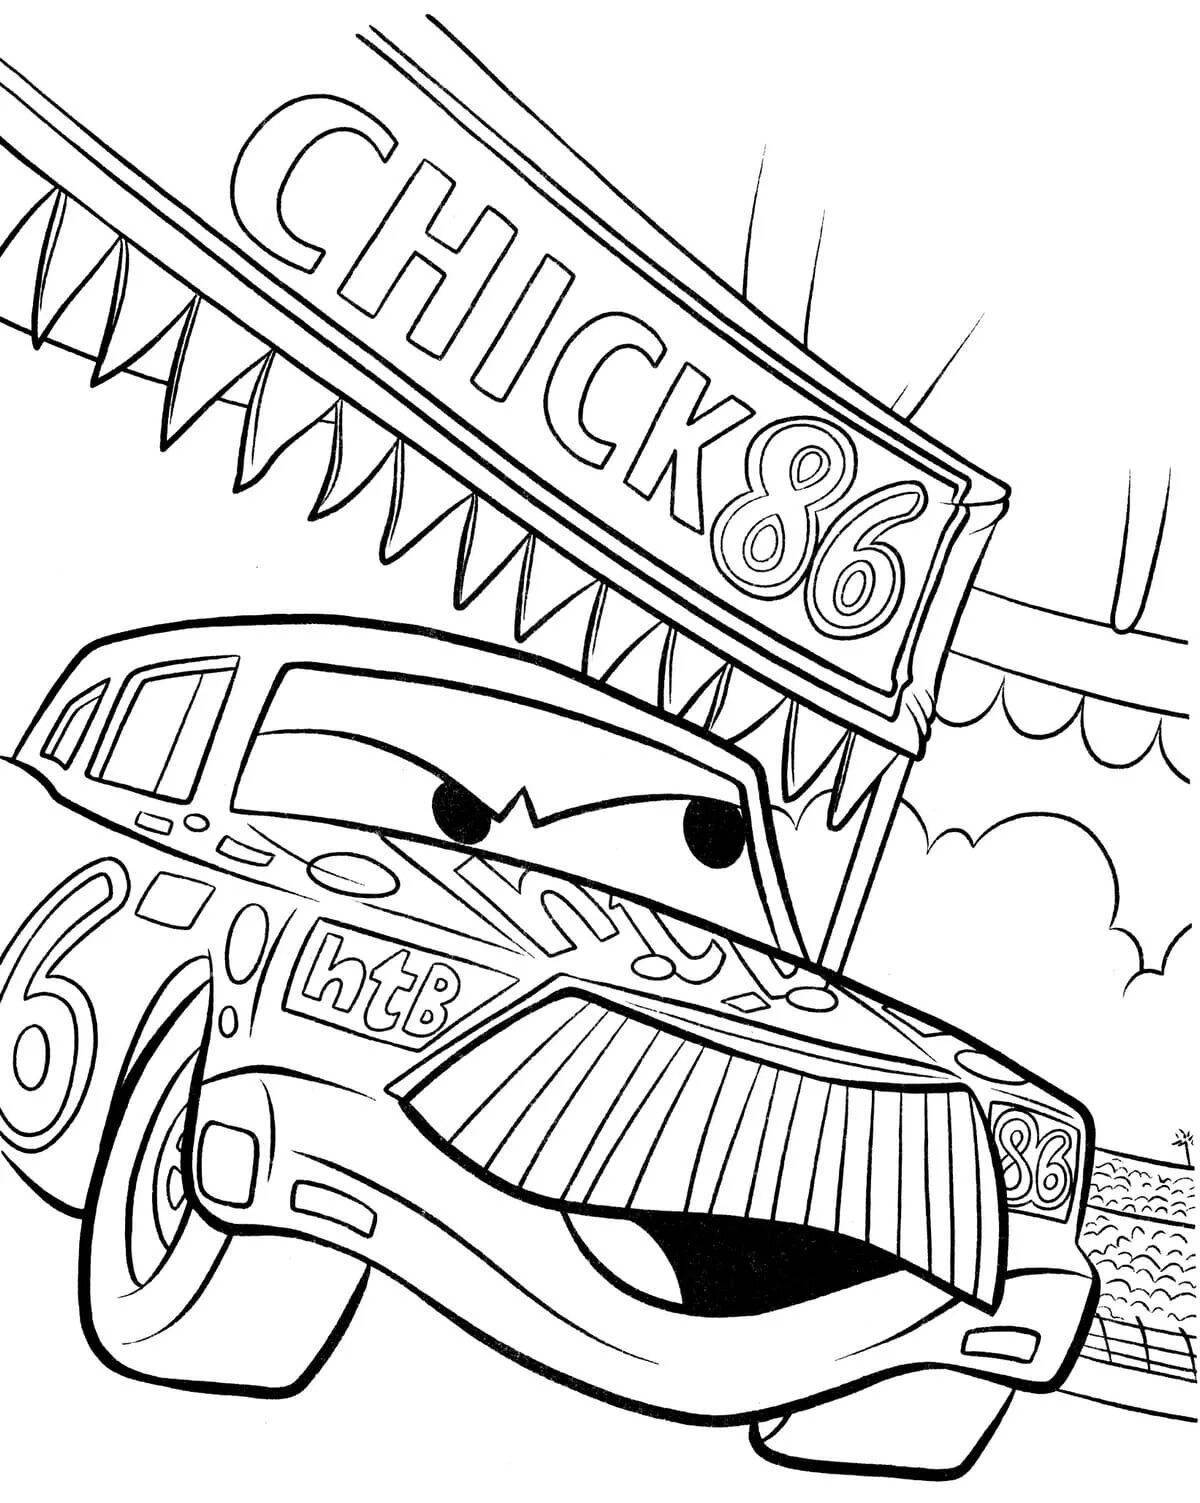 Gorgeous chico hicks coloring page